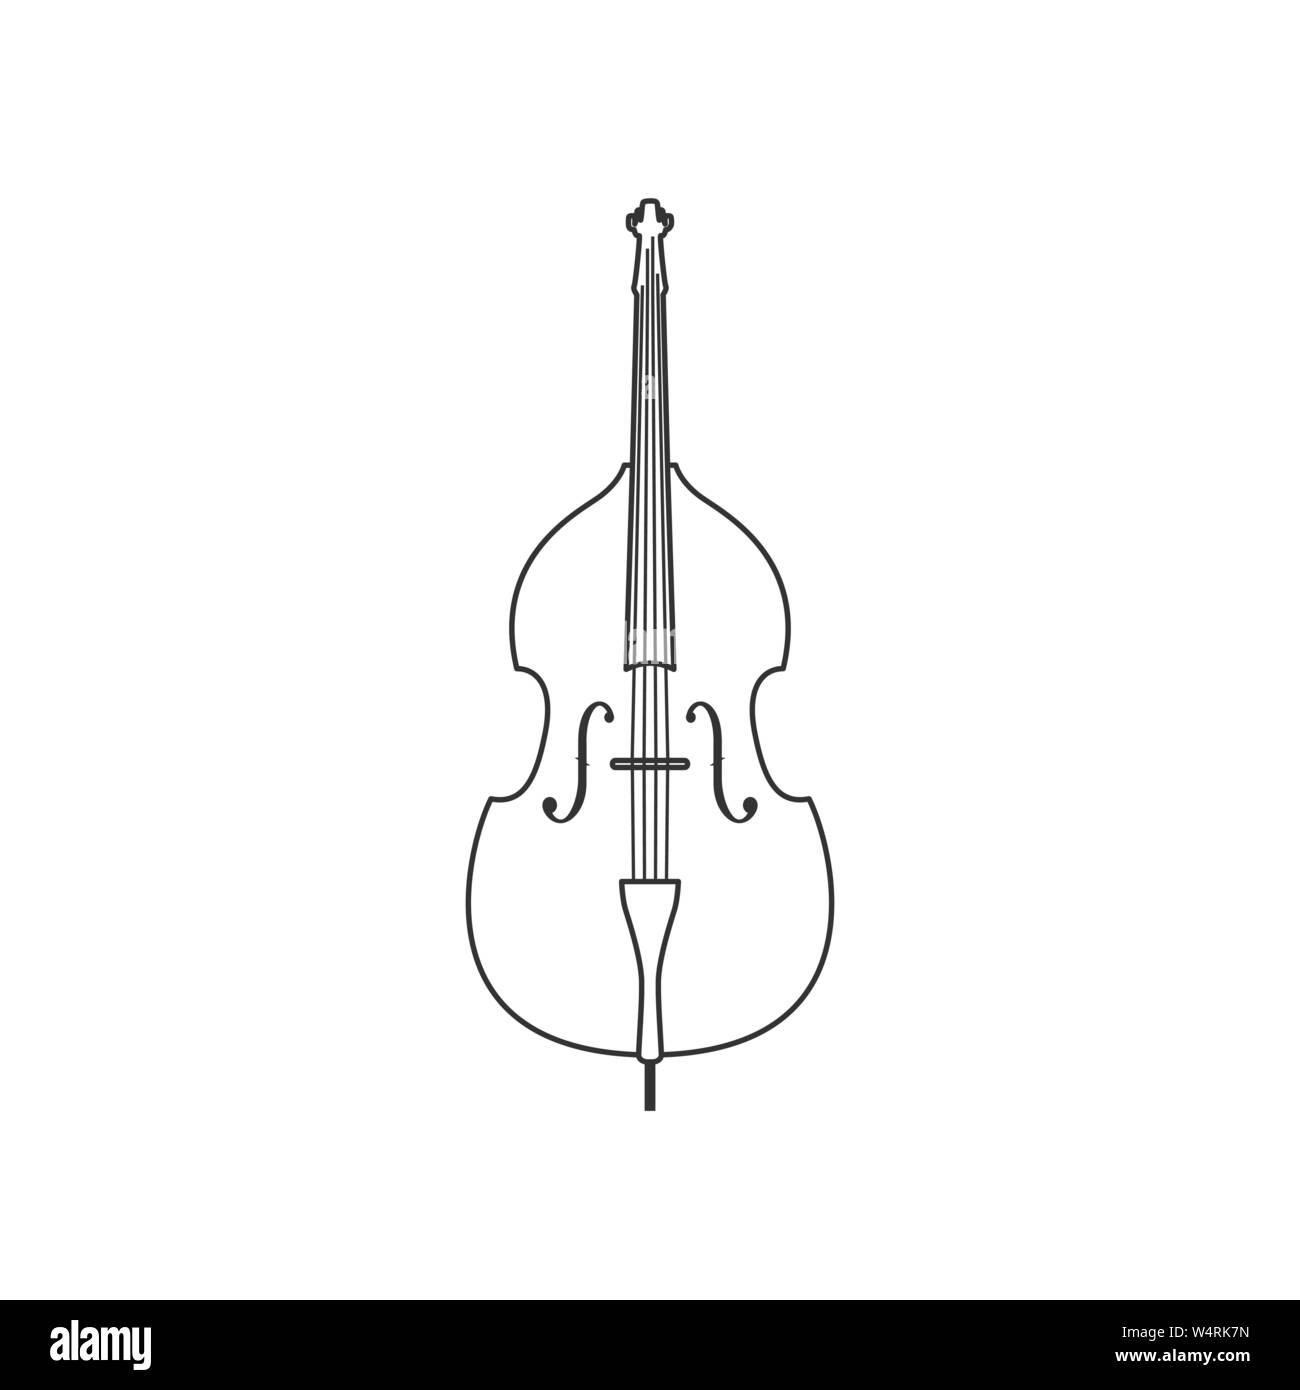 How to draw double bass - YouTube